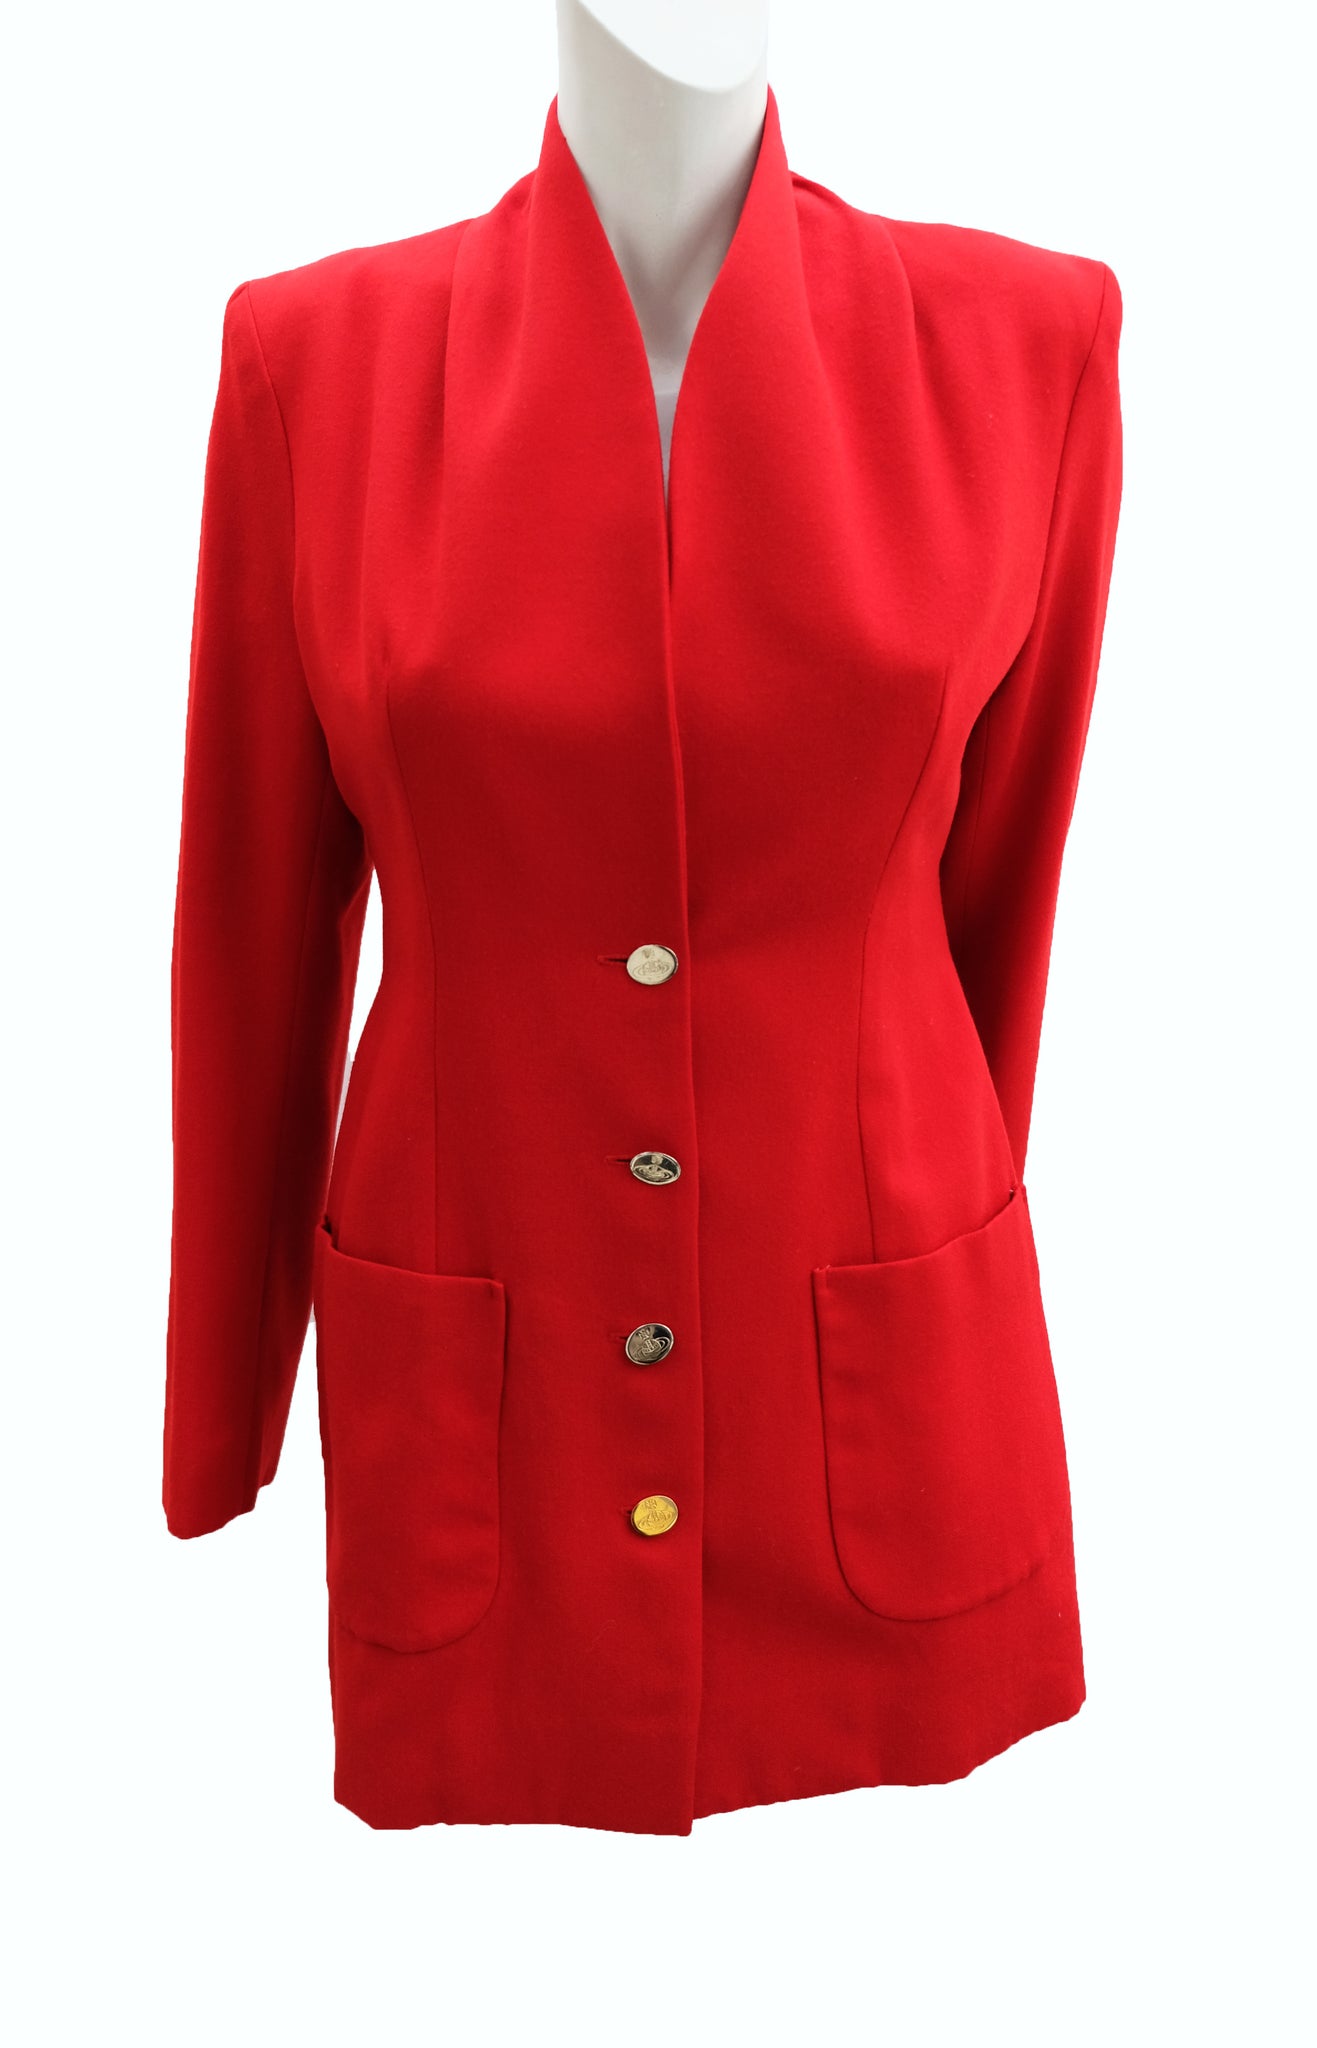 Vivienne Westwood Vintage Jacket in Red Wool with Gold Buttons, UK10 ...